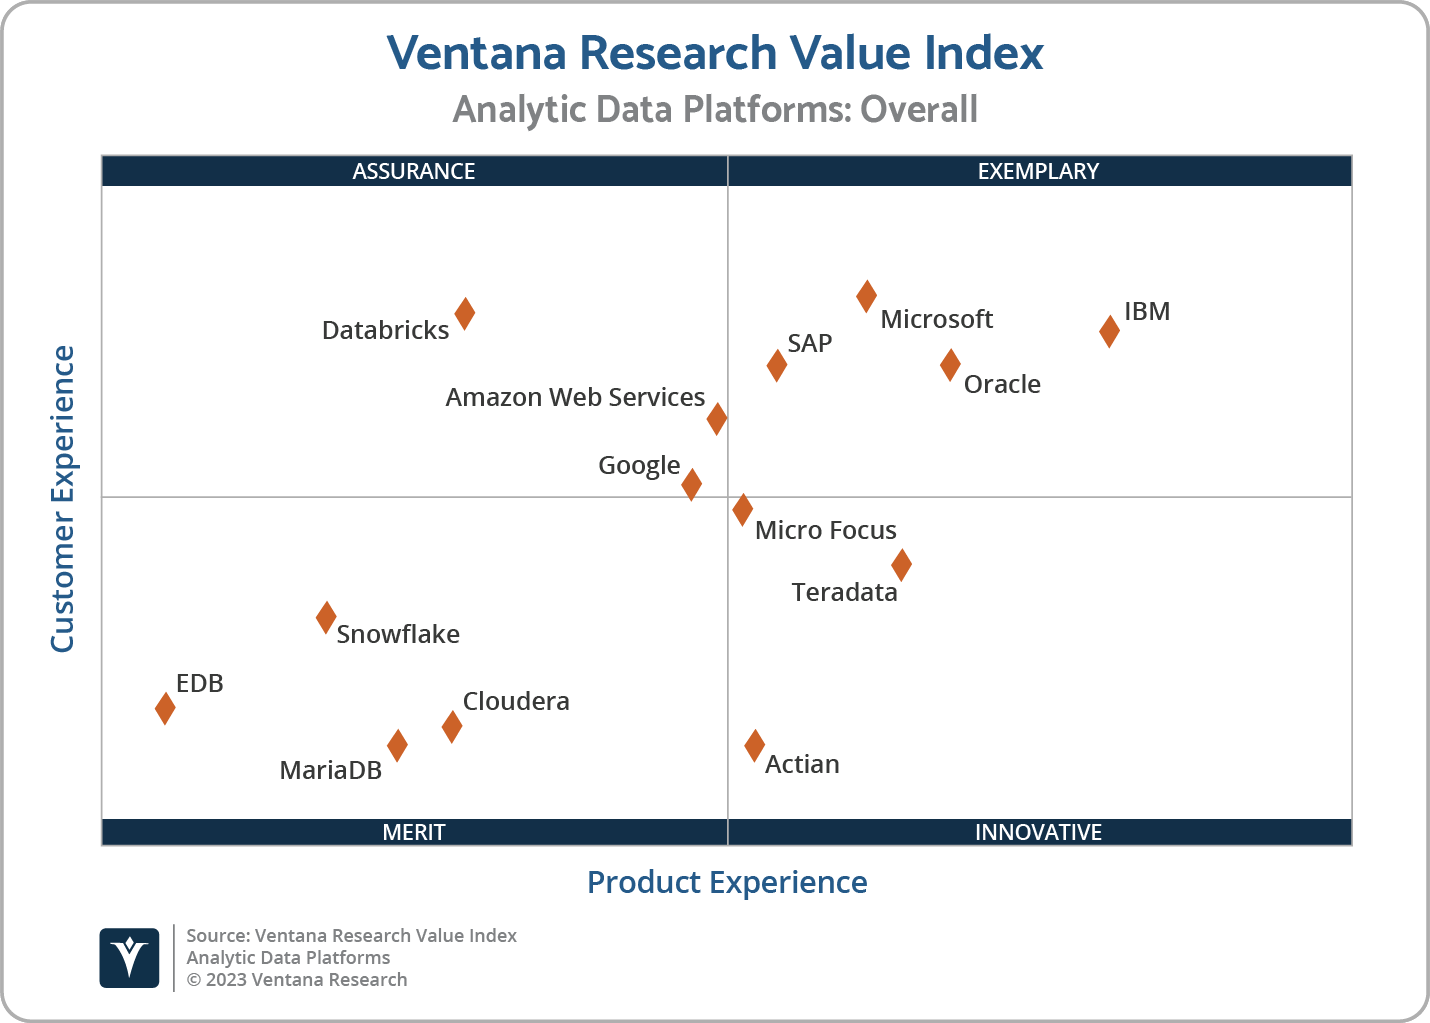 Ventana_Research_Value_Index_Analytic_Data_Platforms_2x2-png